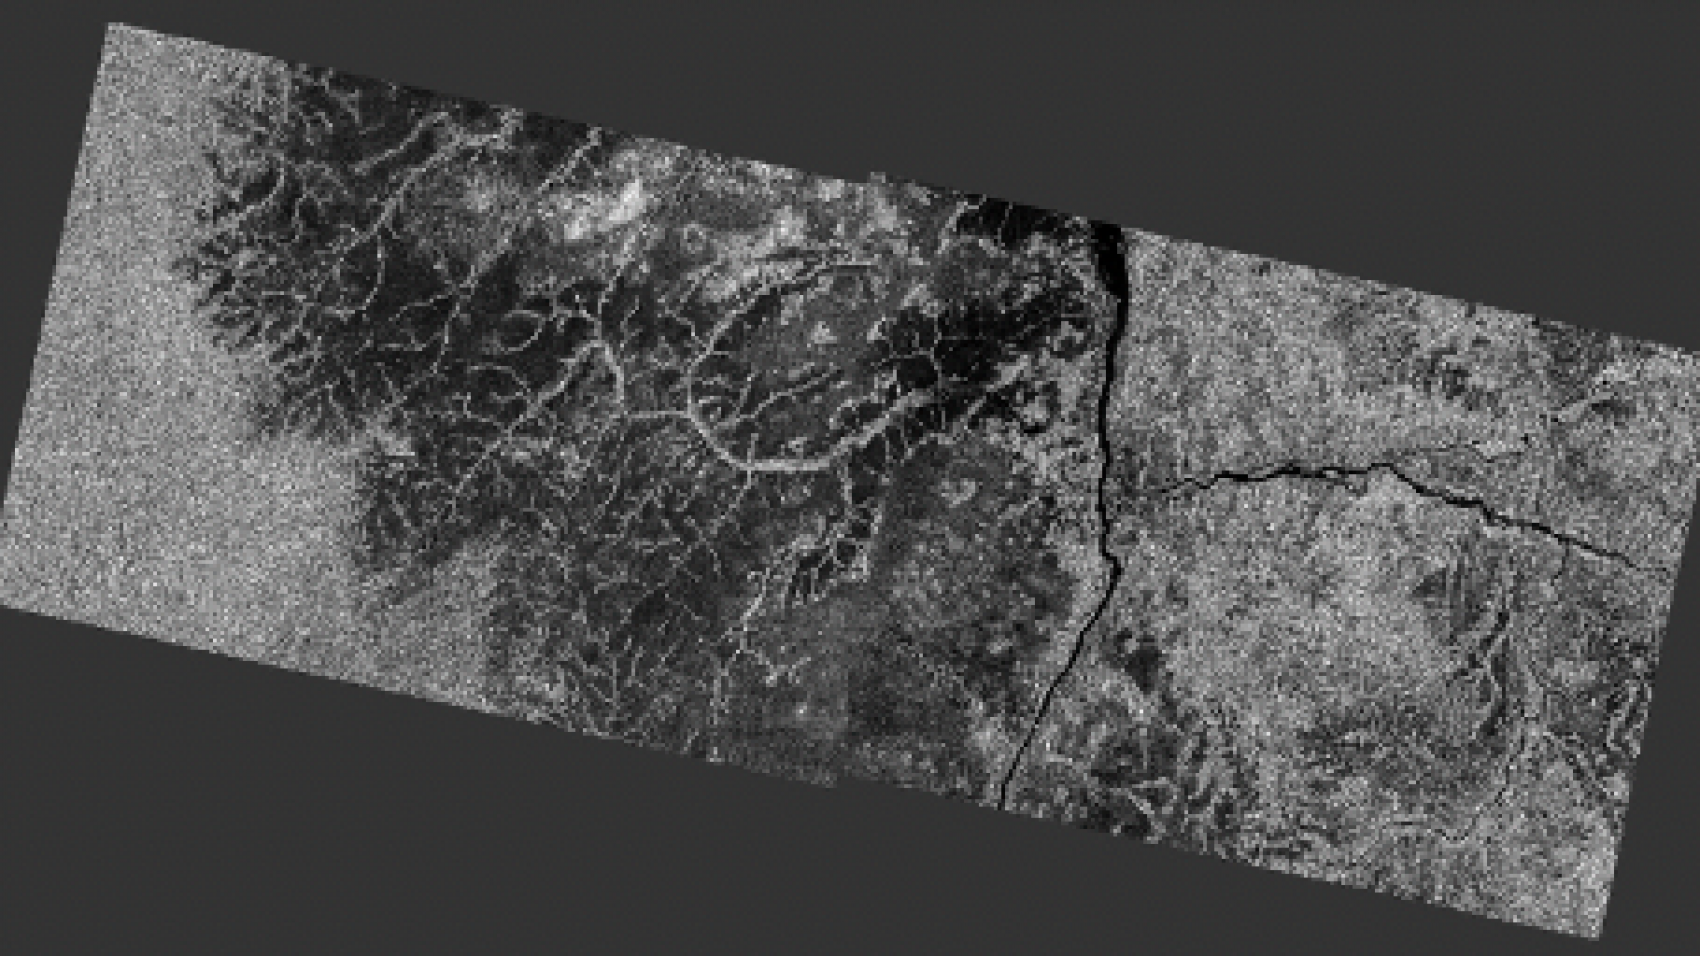 Mosaic of two Sentinel-1 products in separate paths. Credit: Copernicus
Sentinel data 2018, processed by ESA.